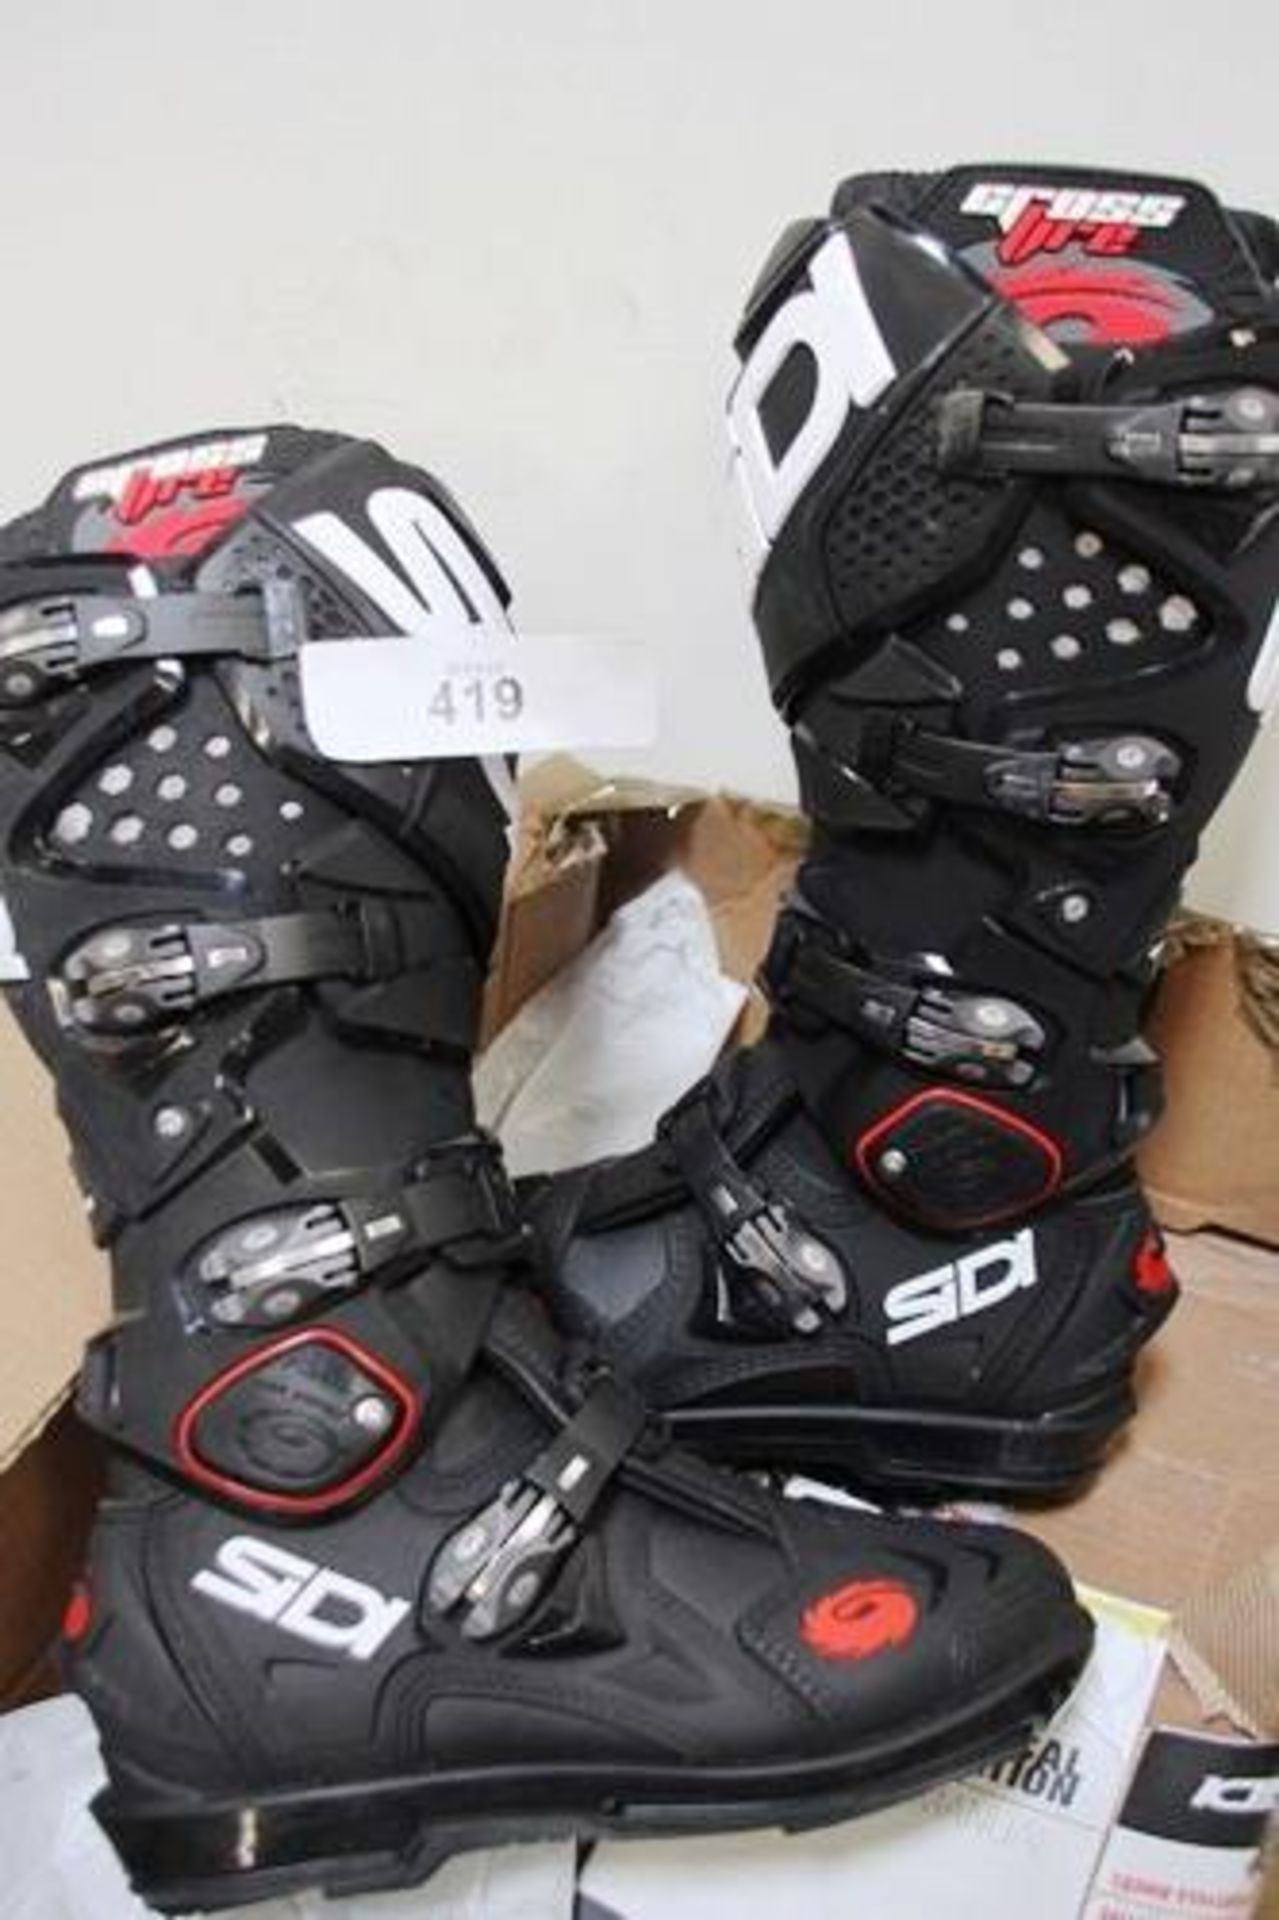 1 x pair of Sidi Crossfire black motorcycle boots, UK size 7 - New in box, box tatty (GS17) - Image 2 of 2